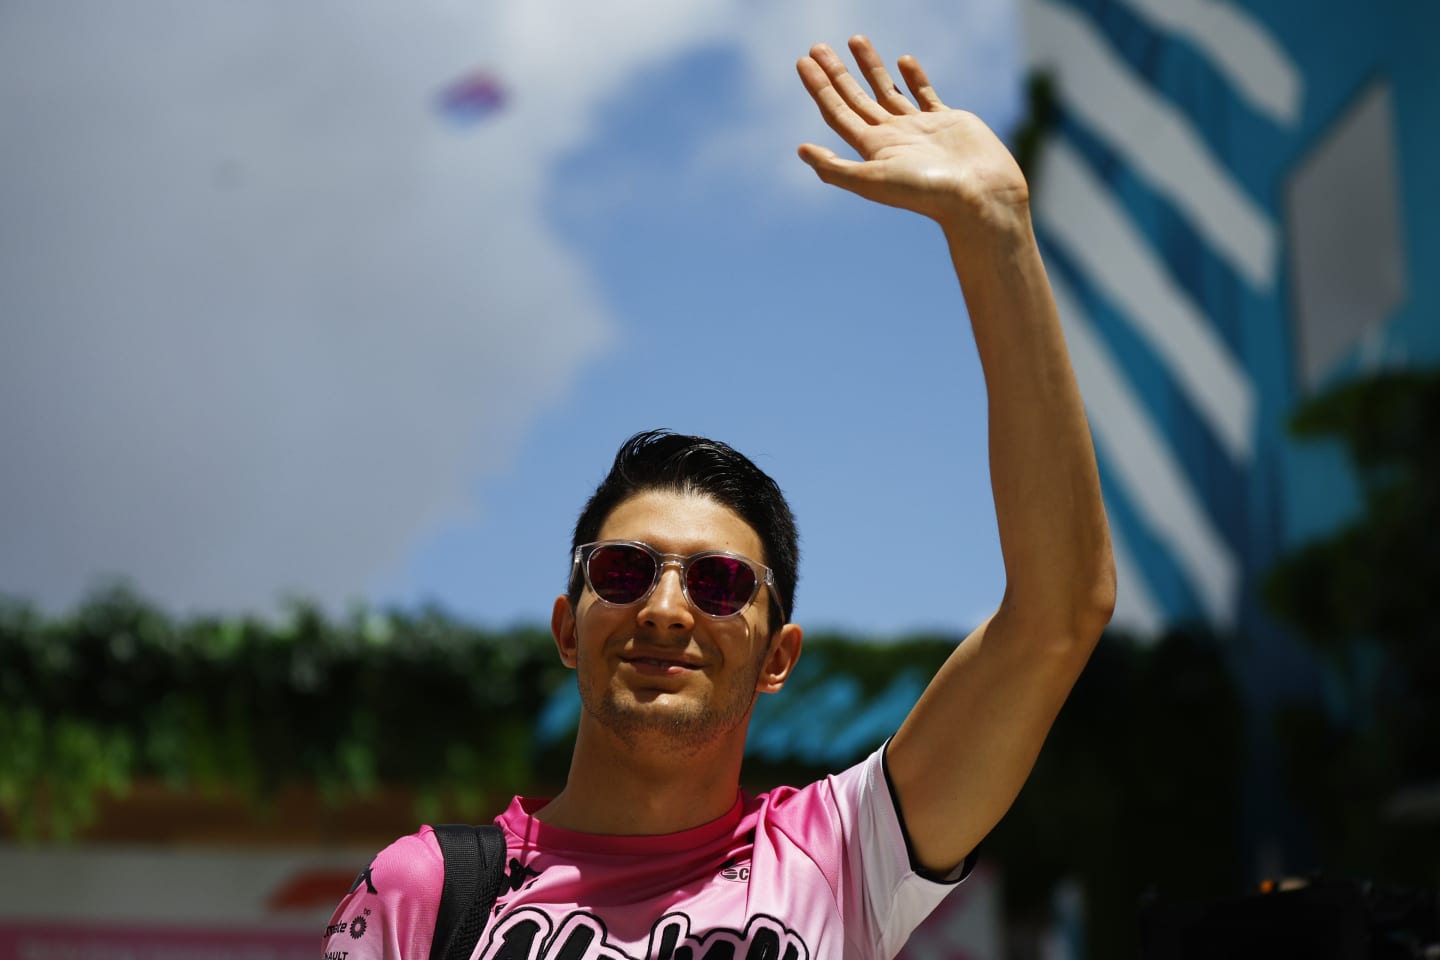 MIAMI, FLORIDA - MAY 08: Esteban Ocon of France and Alpine F1 waves to the crowd from the paddock prior to the F1 Grand Prix of Miami at the Miami International Autodrome on May 08, 2022 in Miami, Florida. (Photo by Jared C. Tilton/Getty Images)